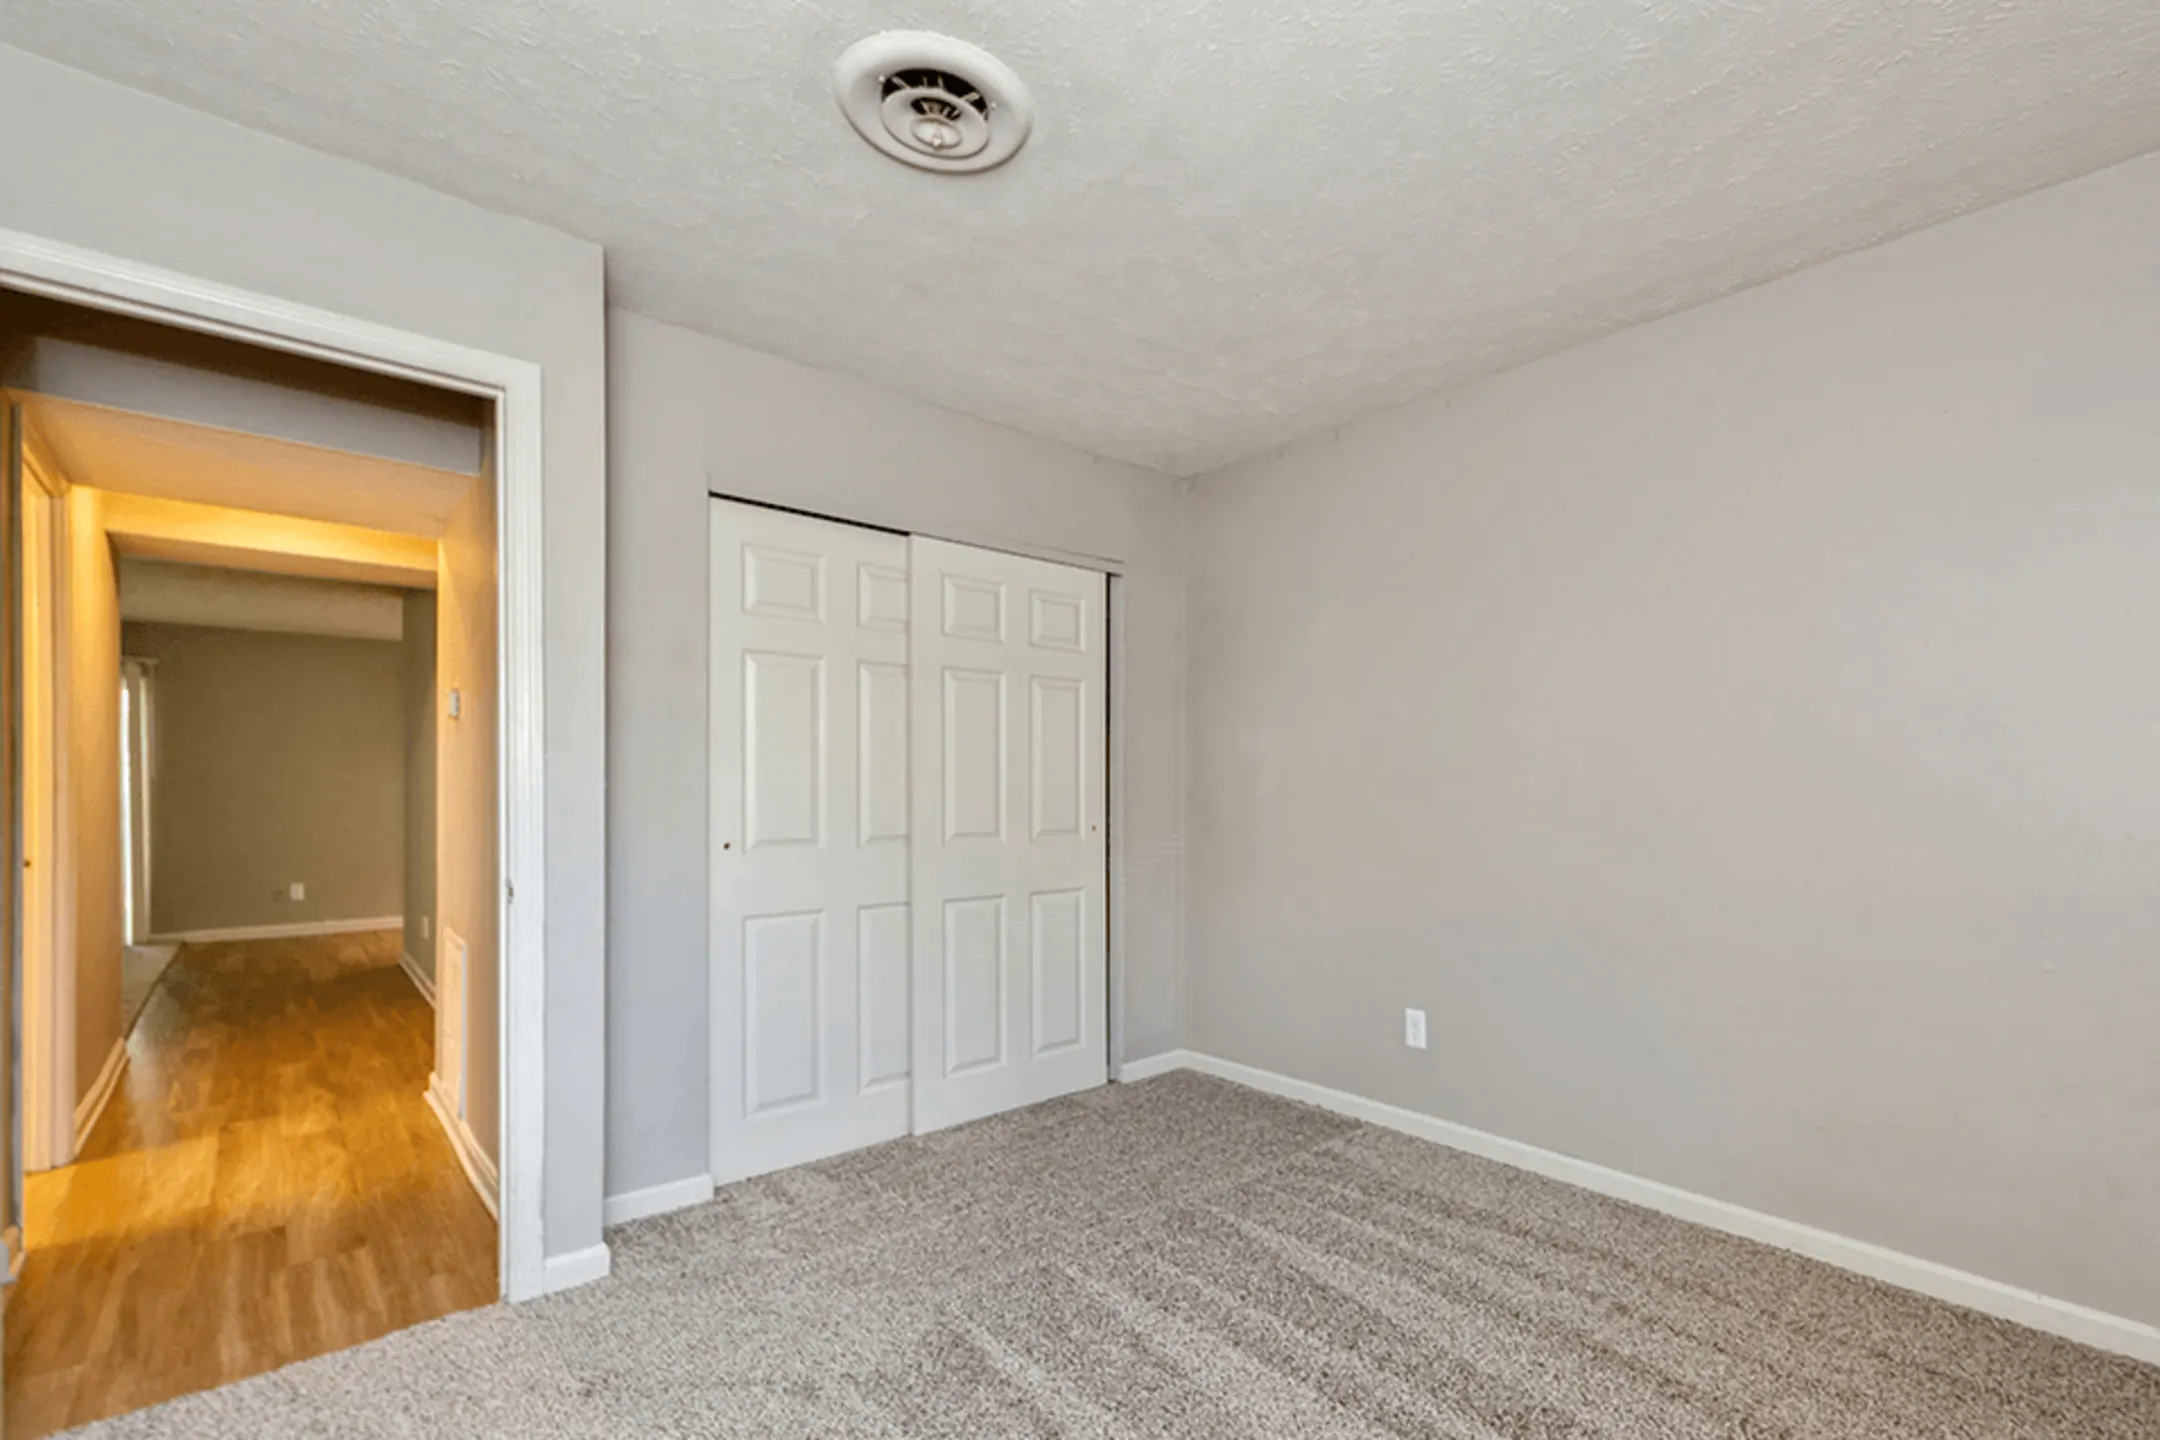 Bedroom - Carriage Hill - Hamilton, OH